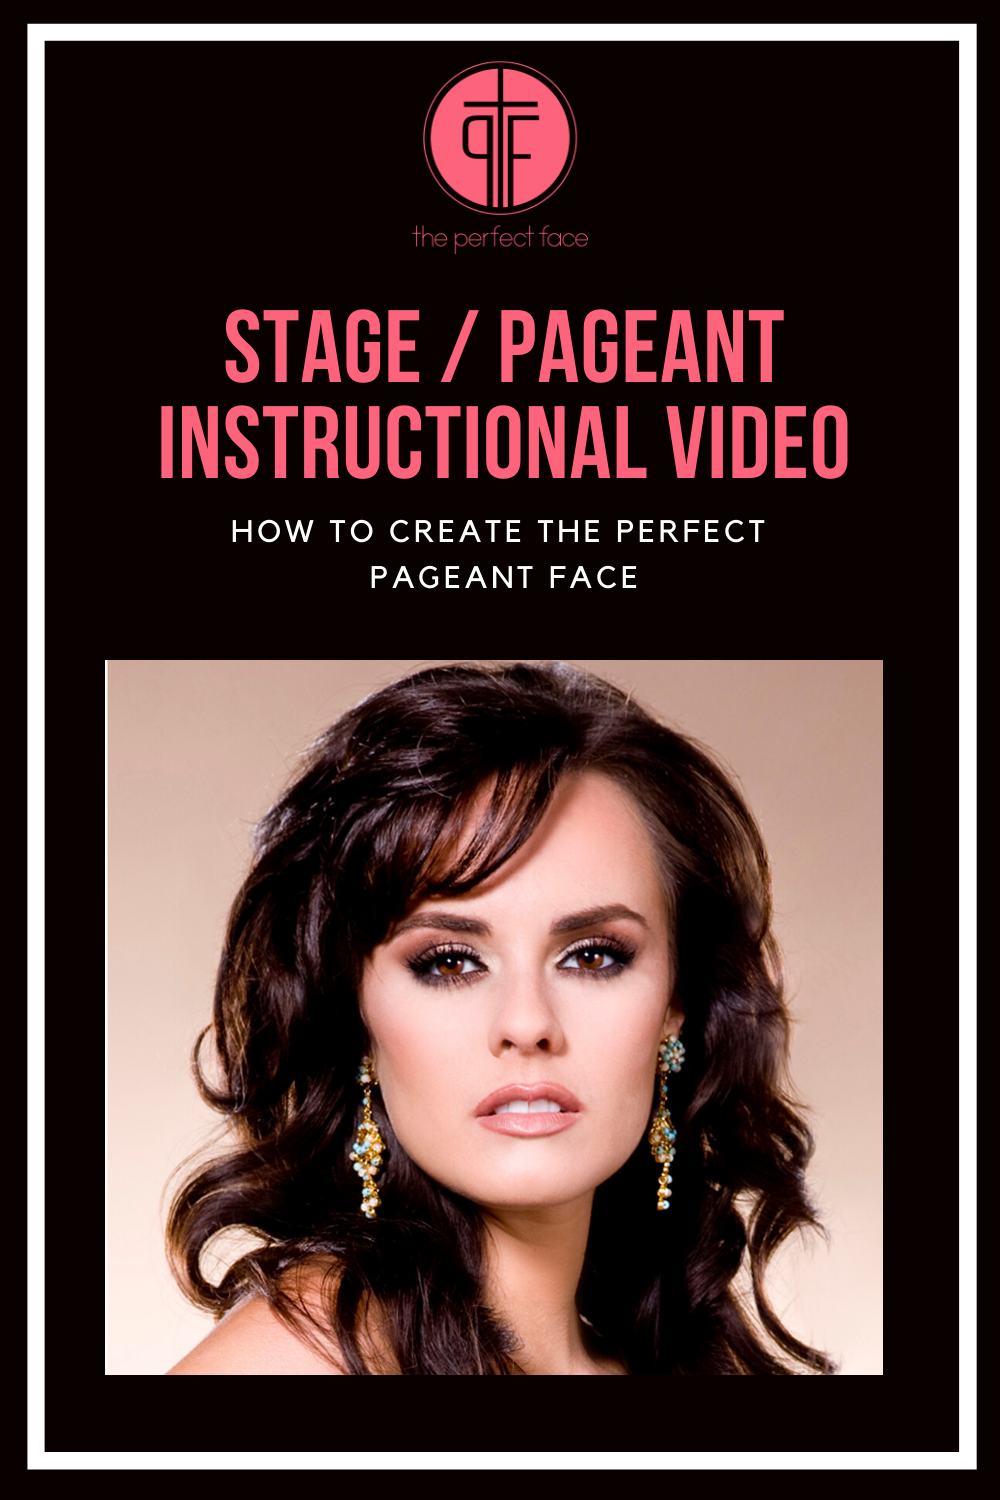 Stage/Pageant Instructional Video - Instant Download